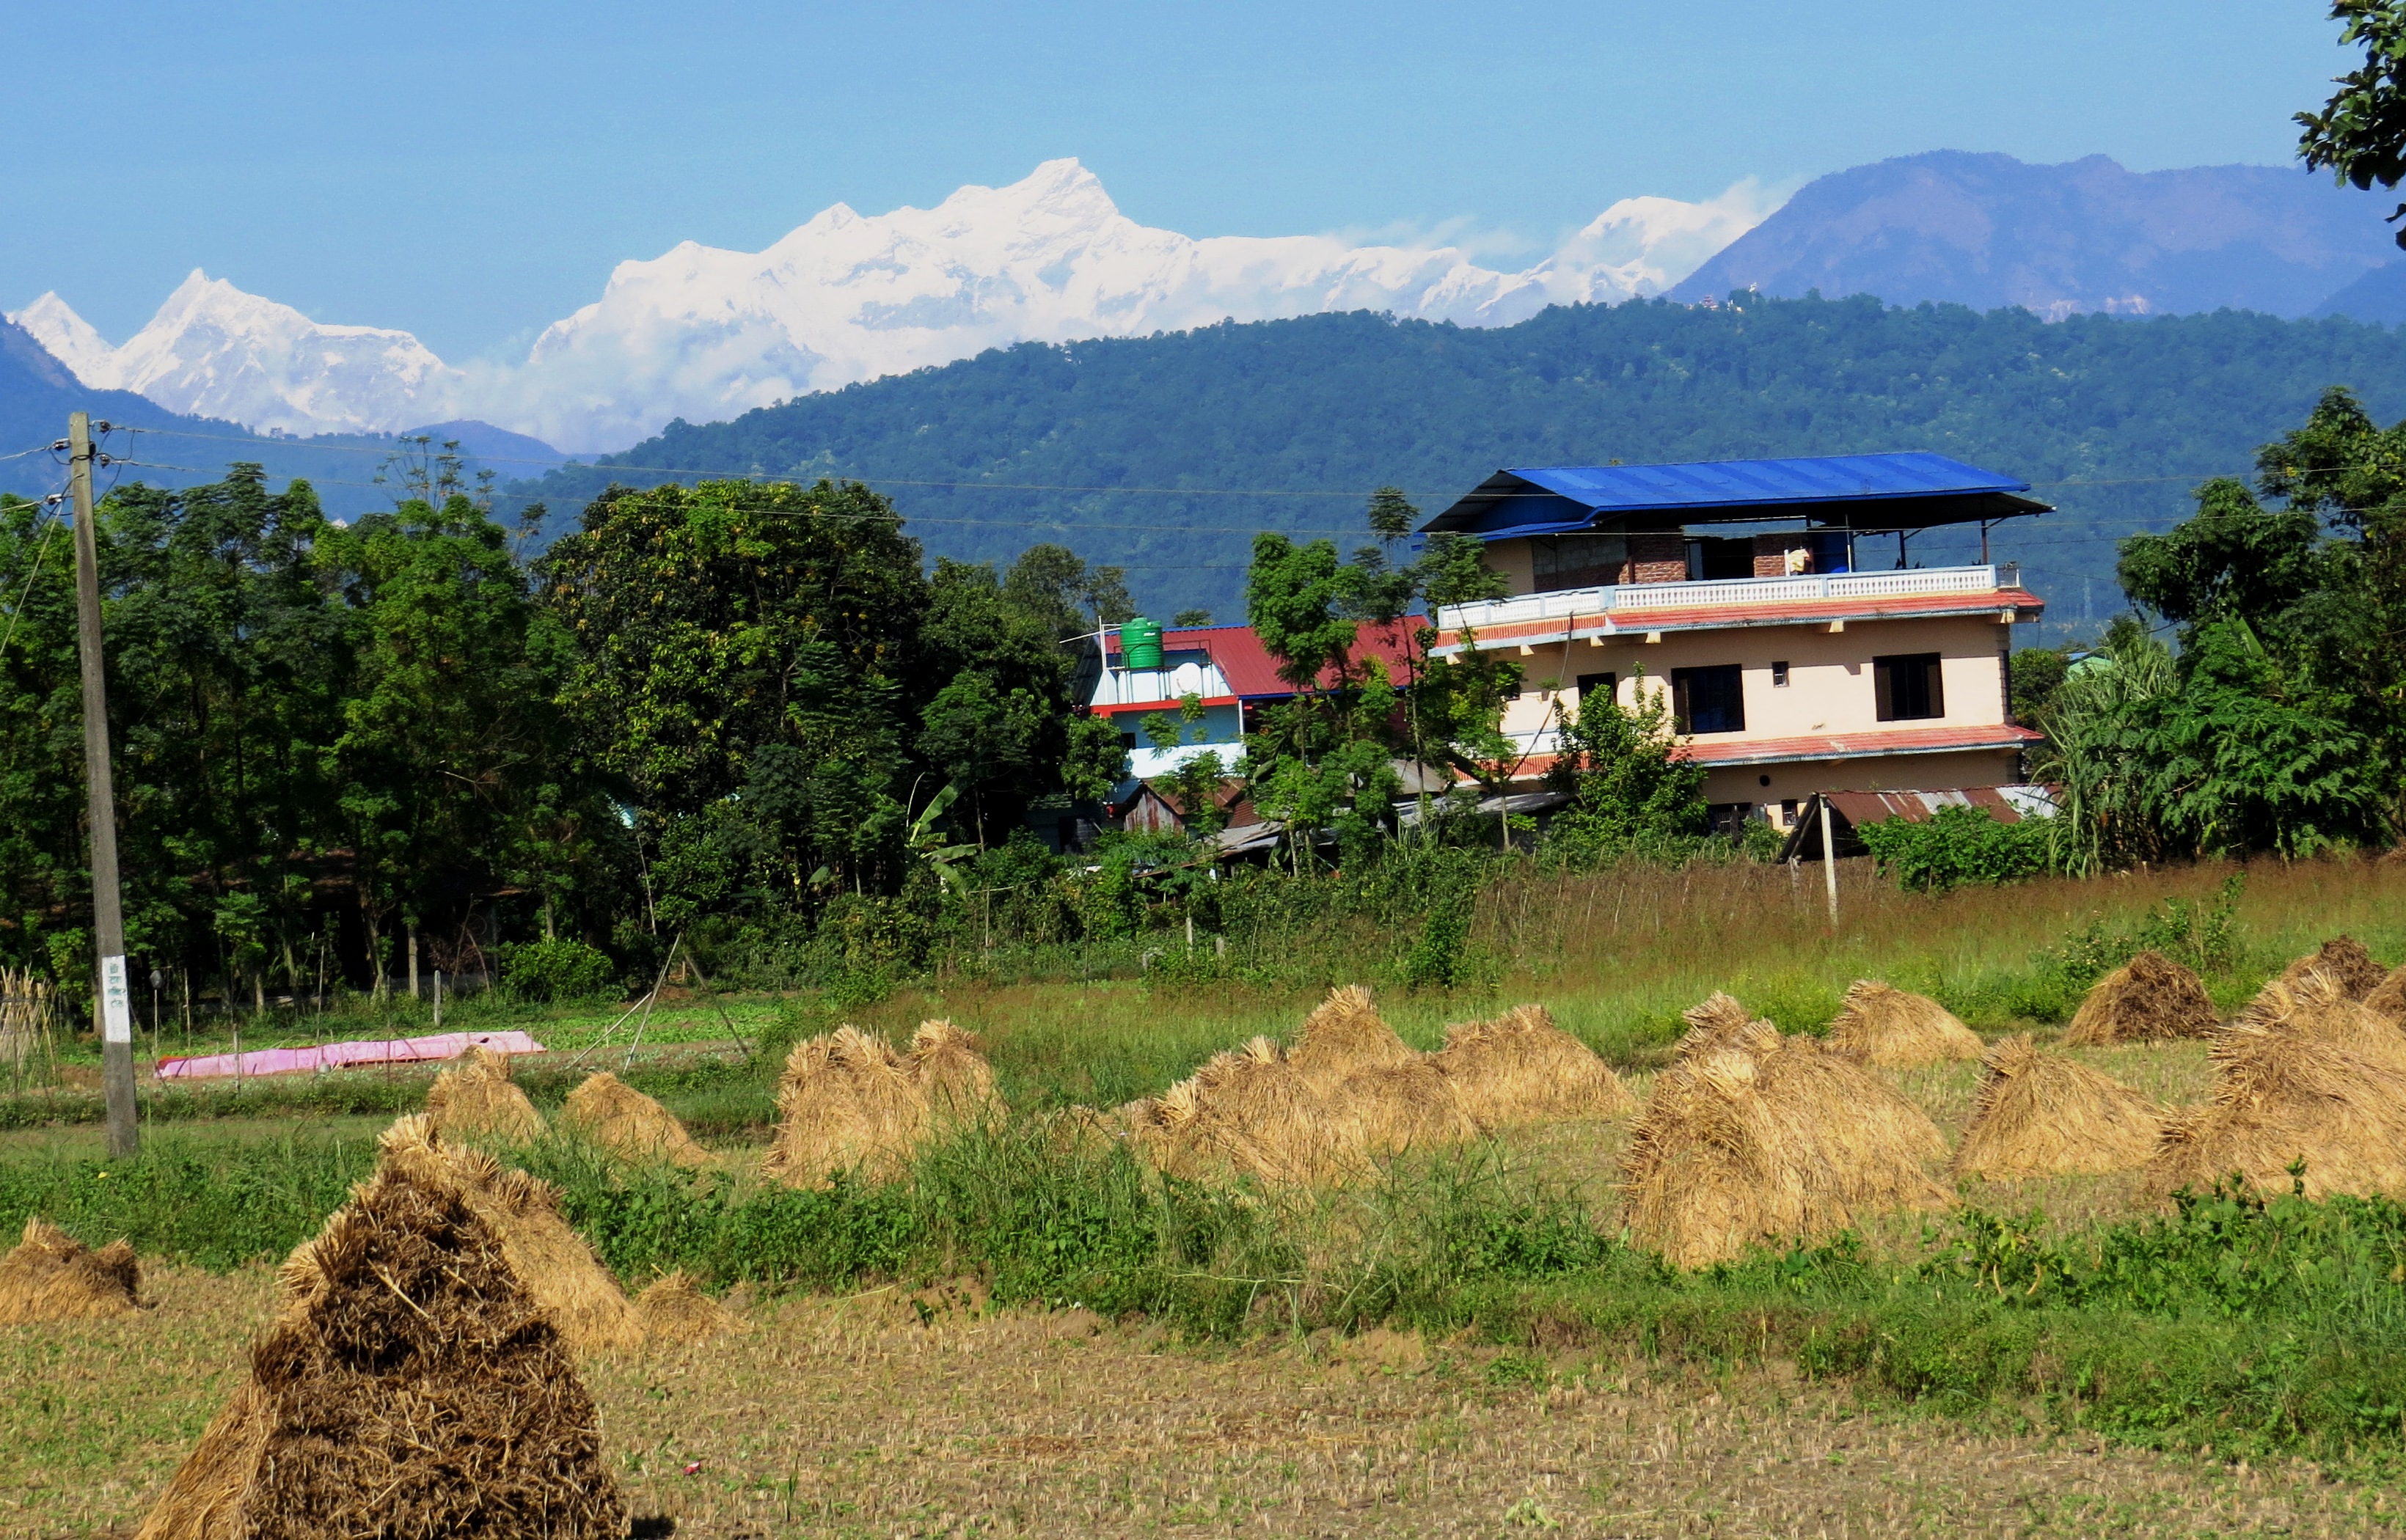 Snow-capped mountains as seen from Chitwan